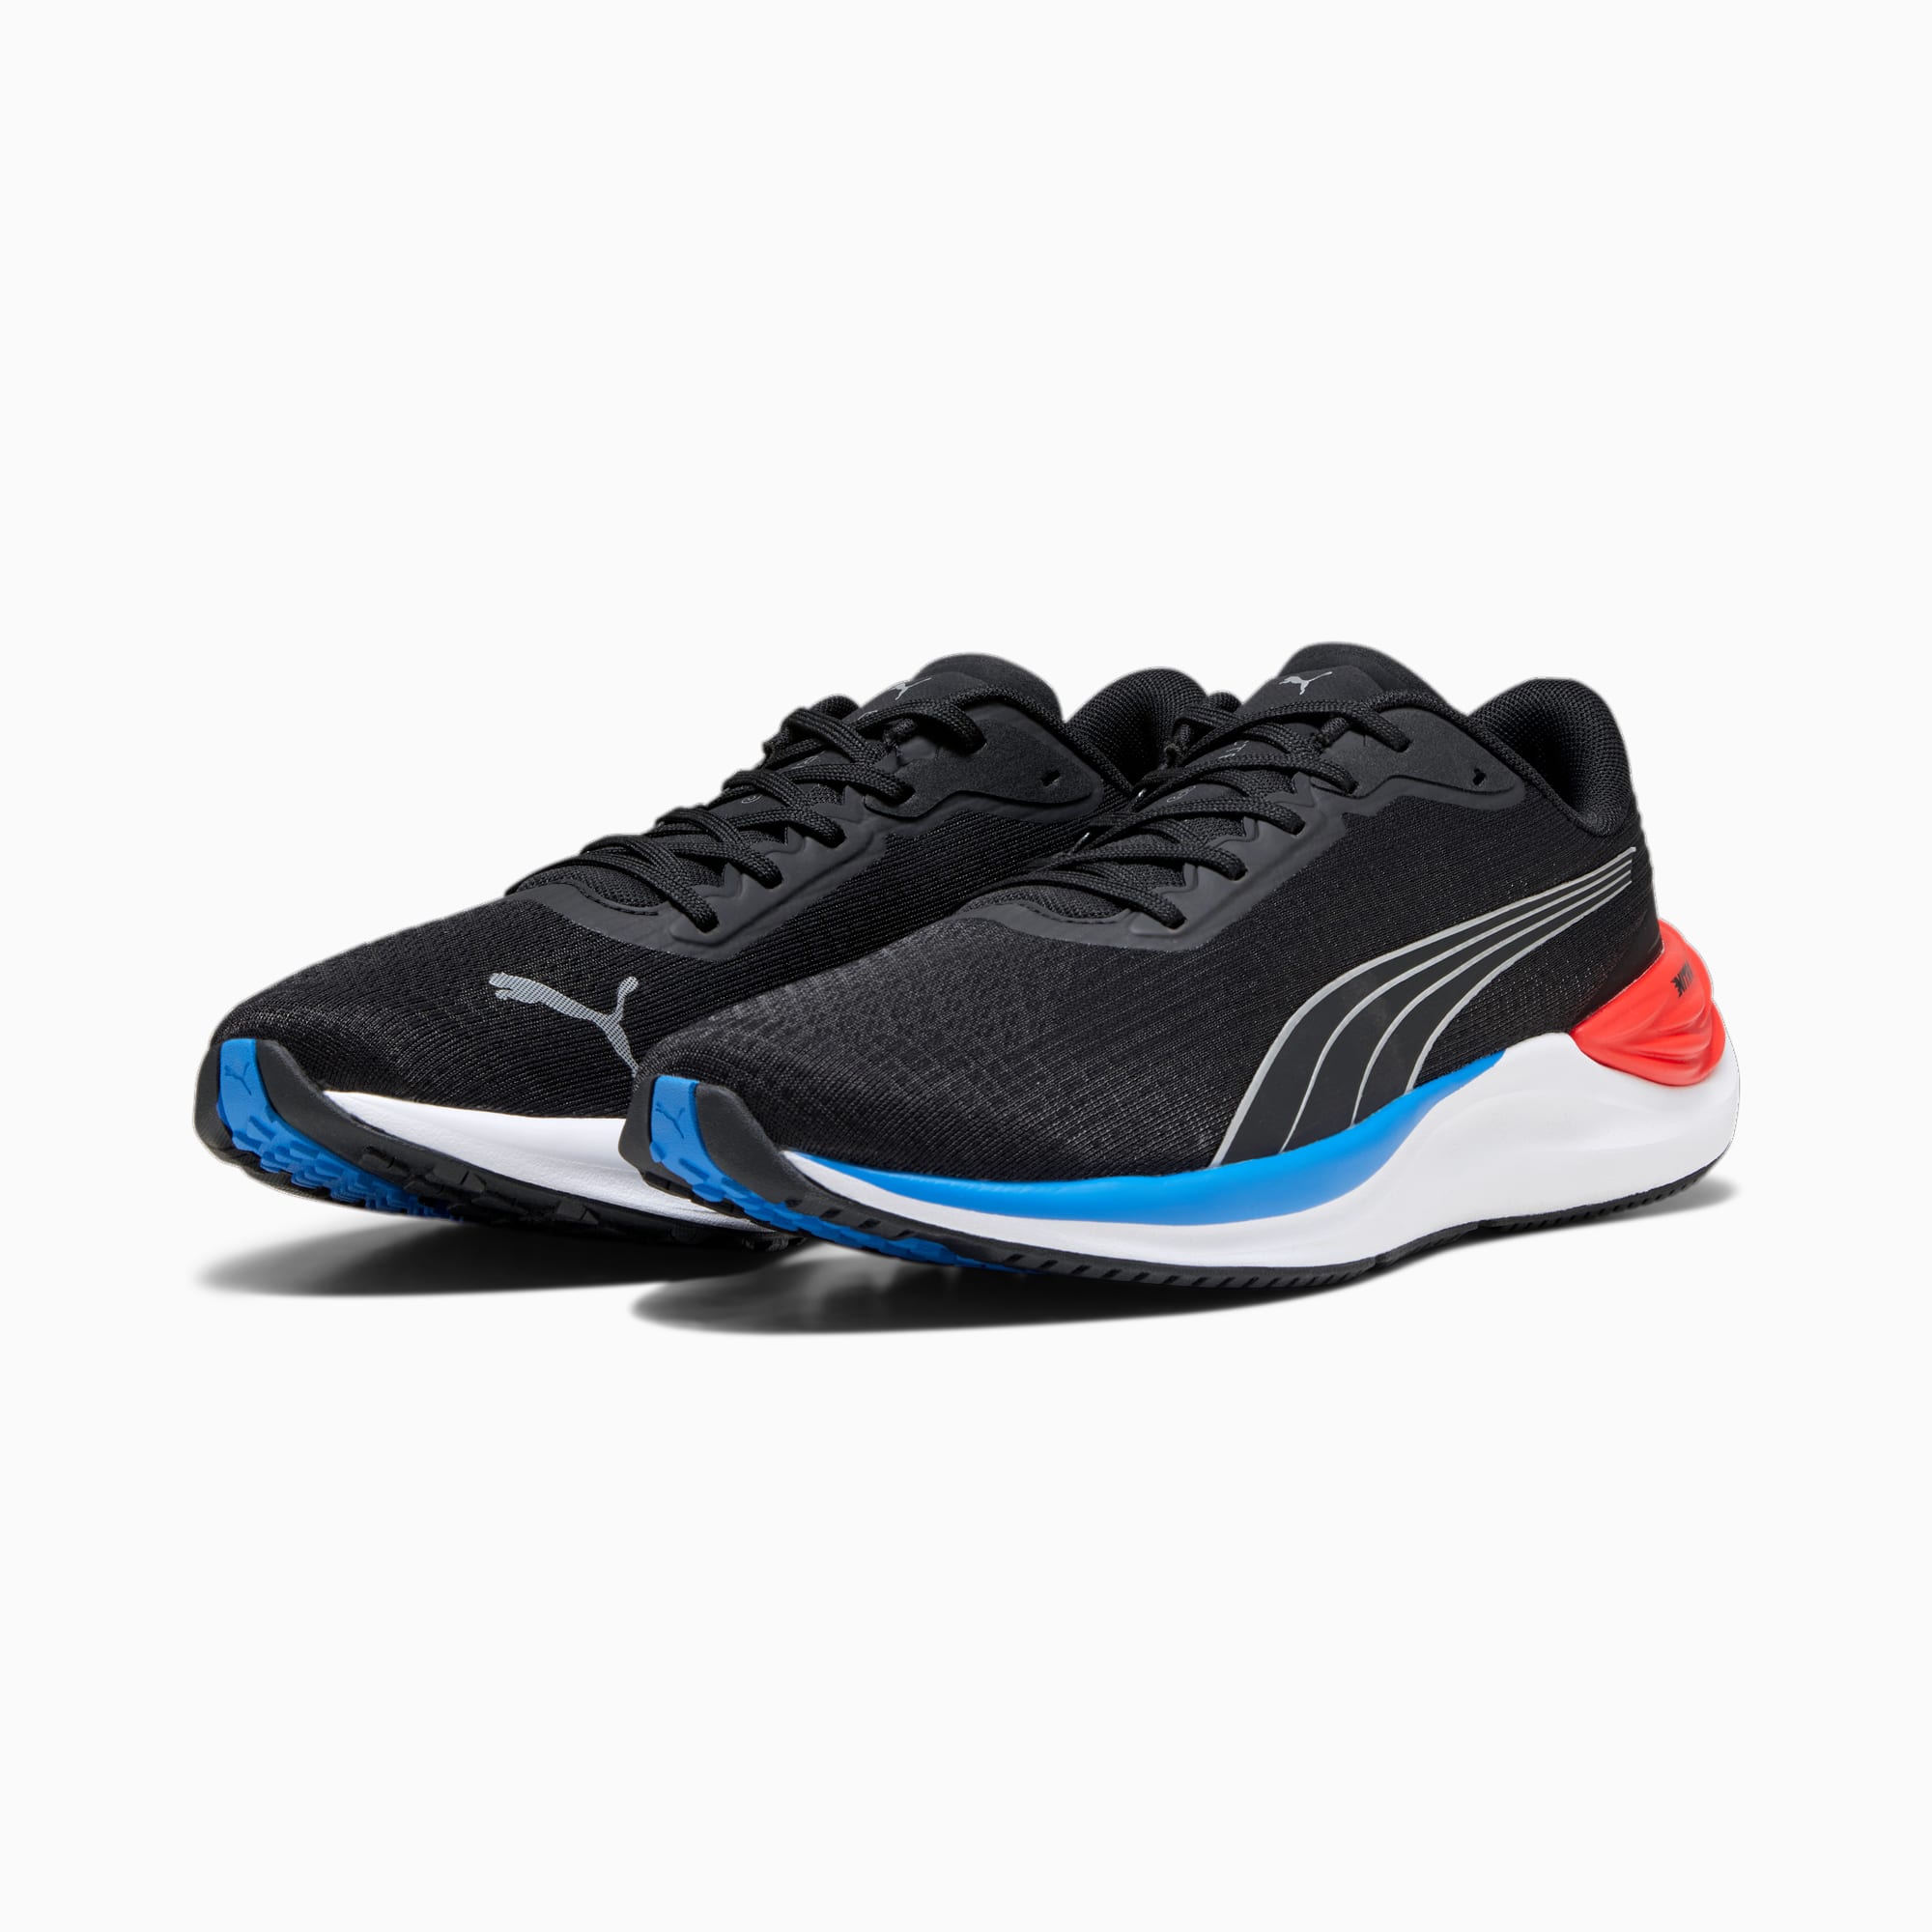 PUMA Electrify Nitro™ 3 Men's Running Shoes, Black/For All Time Red